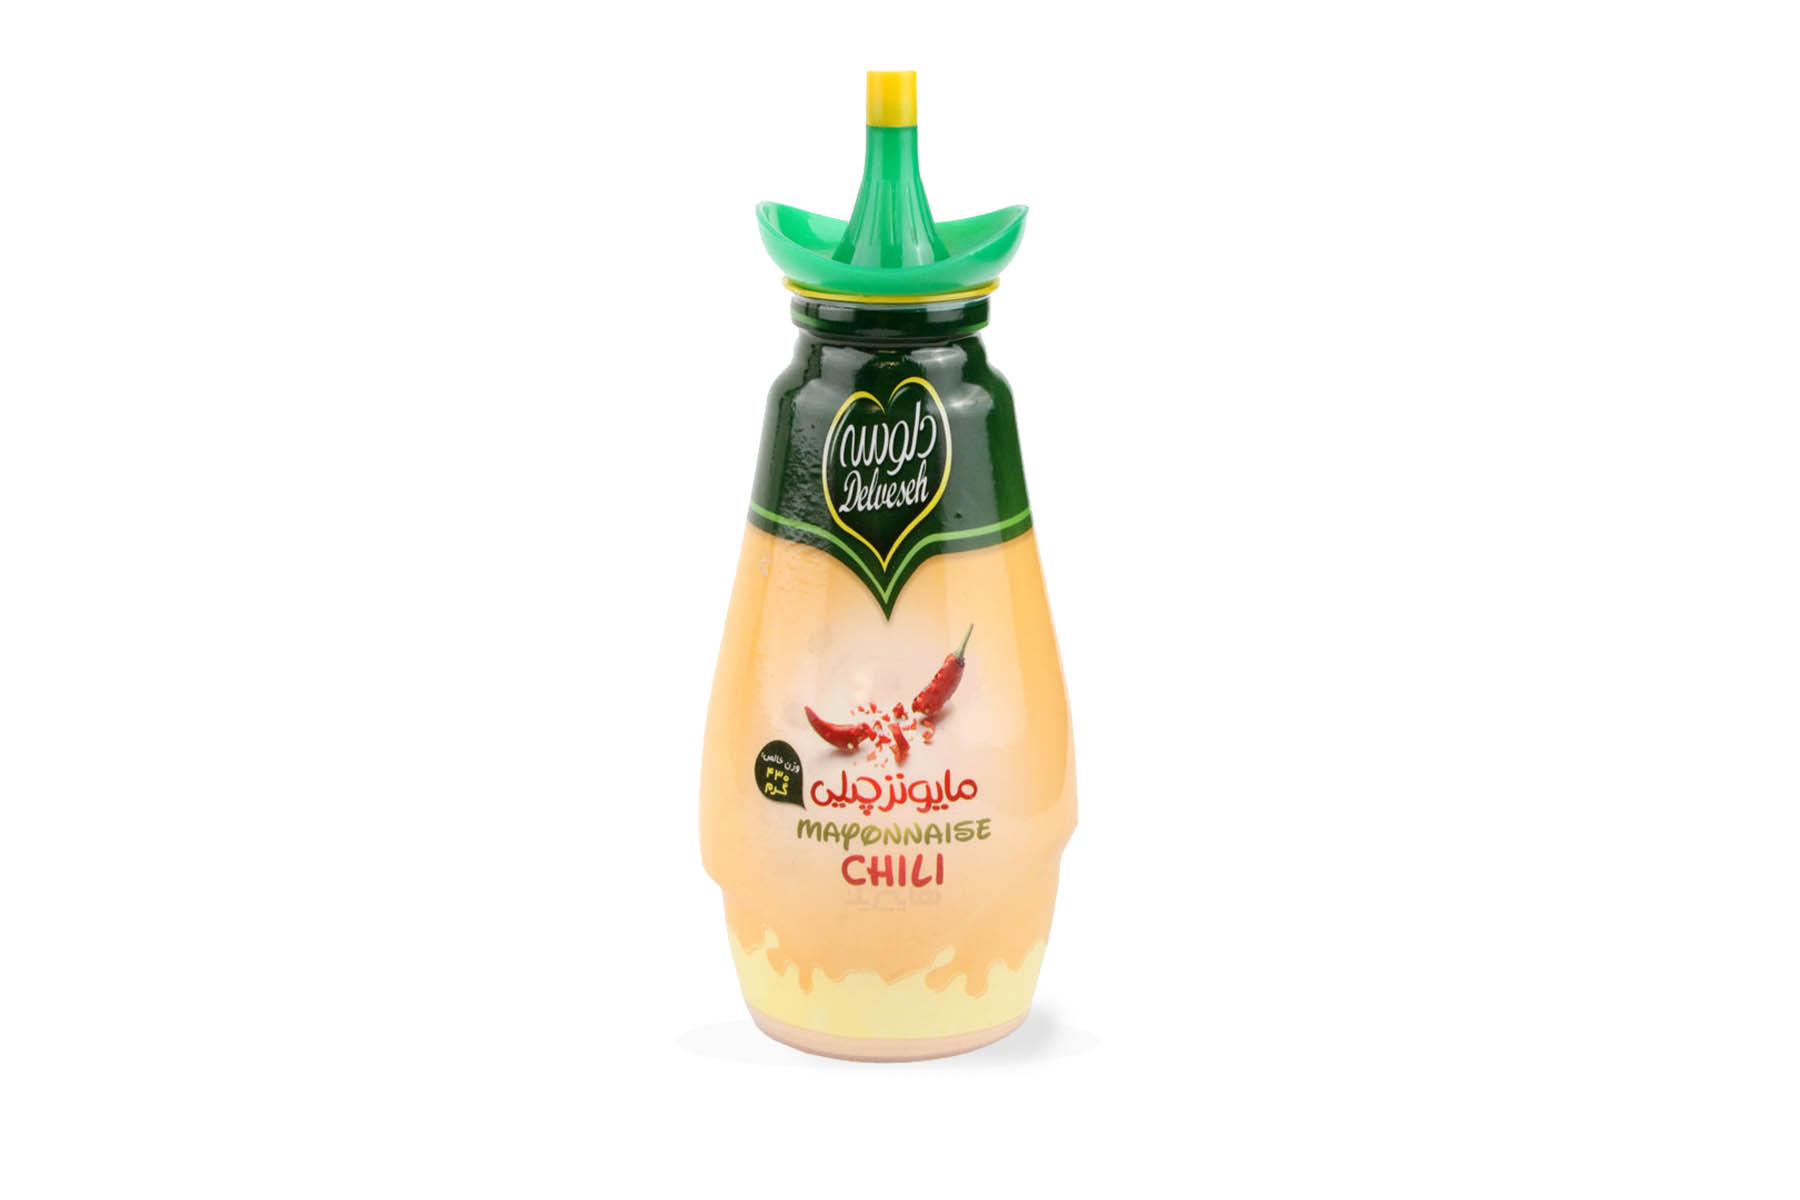 Delveseh chili mayonnaise sauce